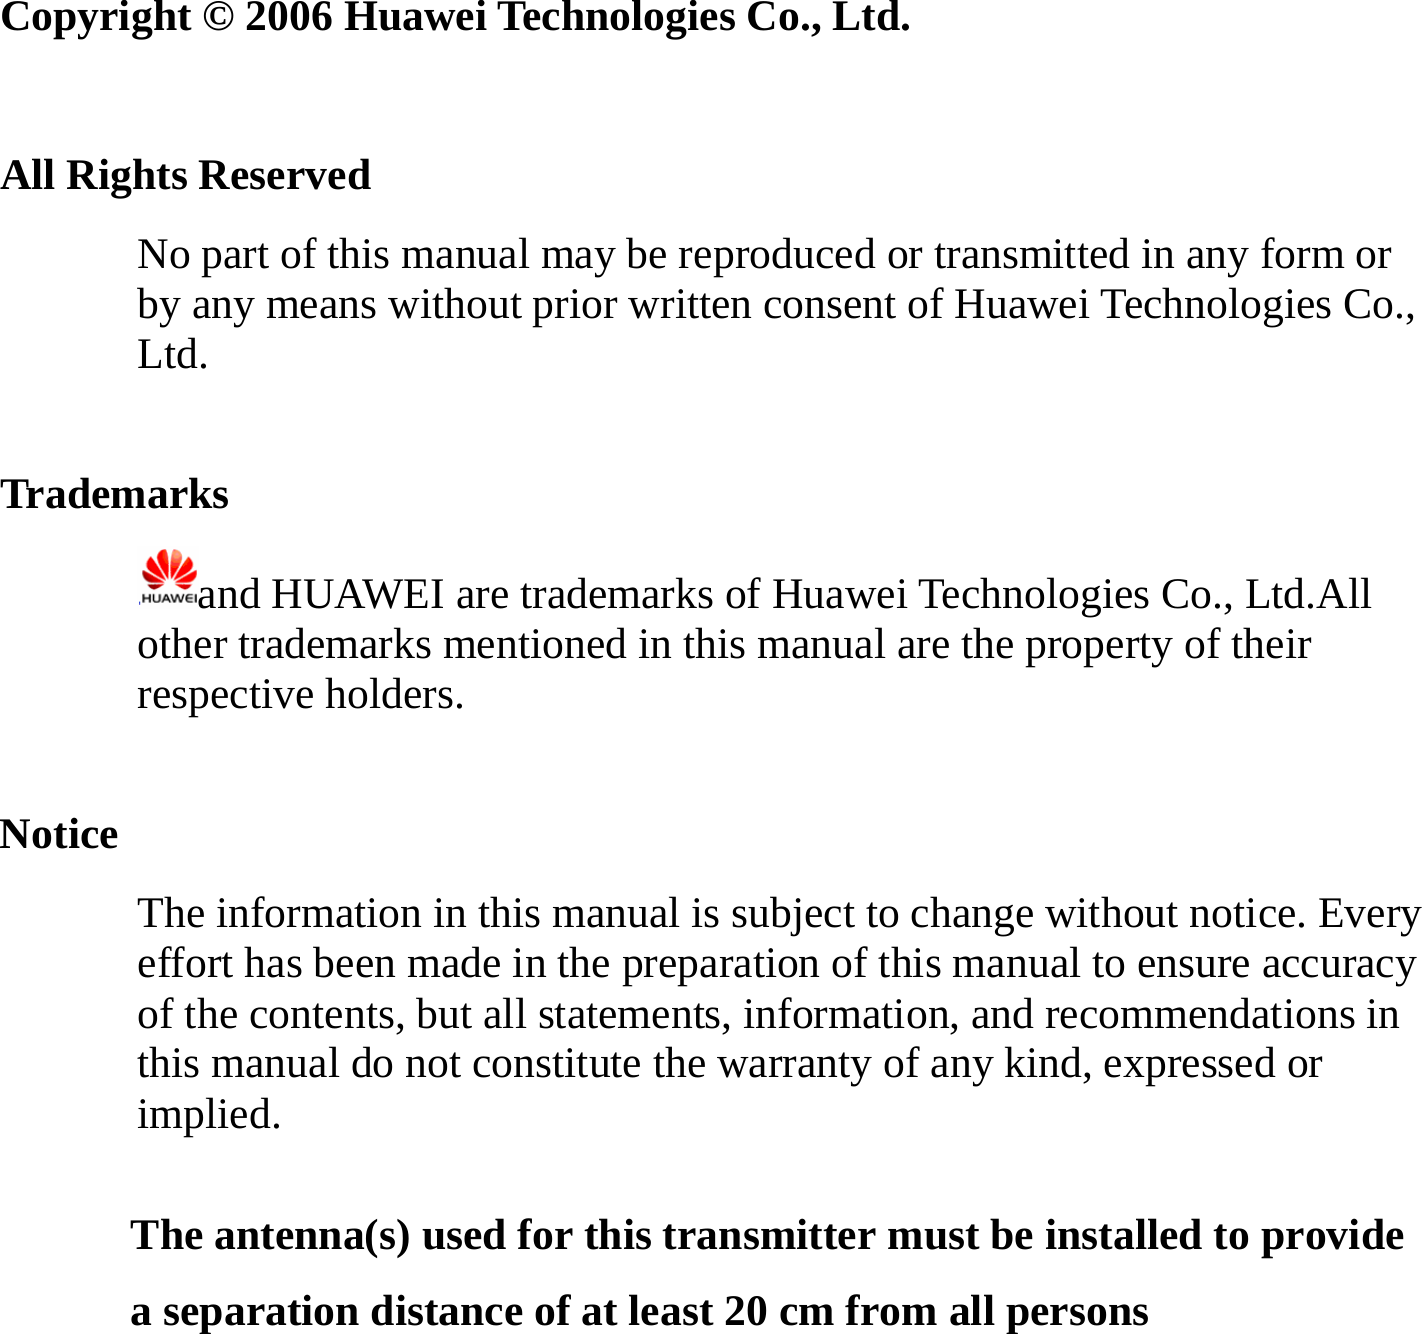   Copyright © 2006 Huawei Technologies Co., Ltd.  All Rights Reserved No part of this manual may be reproduced or transmitted in any form or by any means without prior written consent of Huawei Technologies Co., Ltd.  Trademarks and HUAWEI are trademarks of Huawei Technologies Co., Ltd.All other trademarks mentioned in this manual are the property of their respective holders.  Notice The information in this manual is subject to change without notice. Every effort has been made in the preparation of this manual to ensure accuracy of the contents, but all statements, information, and recommendations in this manual do not constitute the warranty of any kind, expressed or implied. The antenna(s) used for this transmitter must be installed to provide a separation distance of at least 20 cm from all persons  